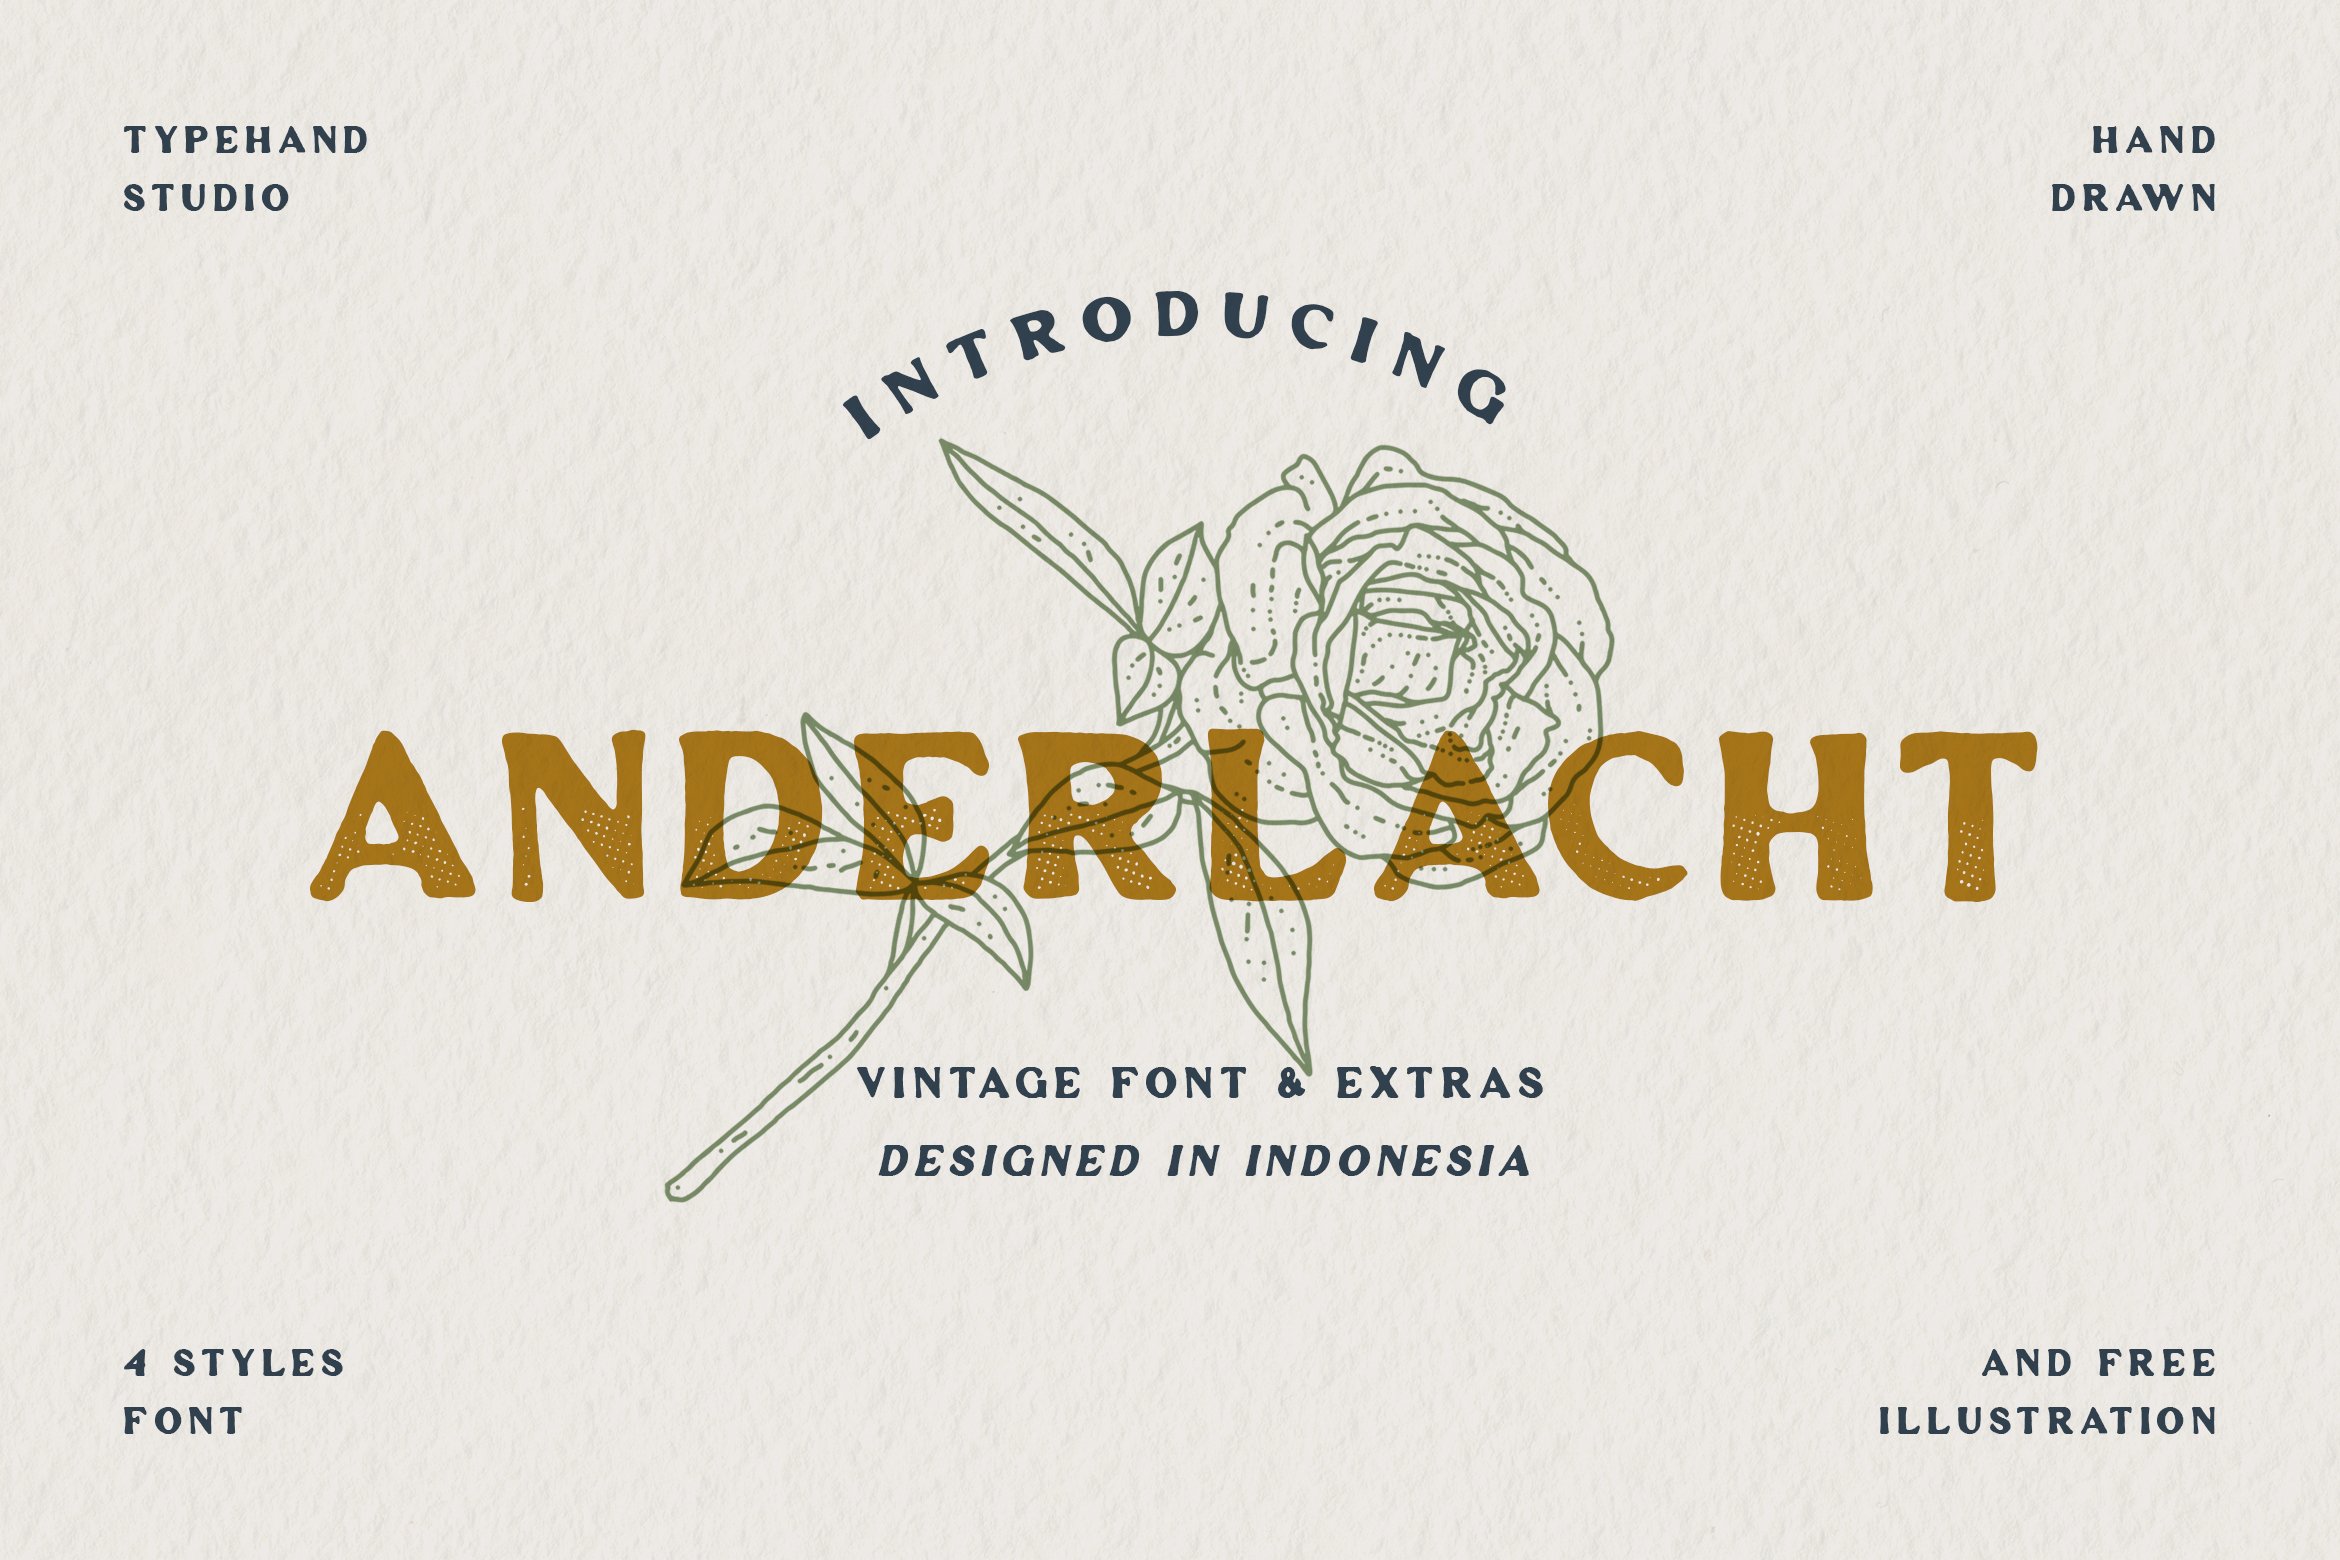 Anderlacht - Vintage Serif + Extras cover image.